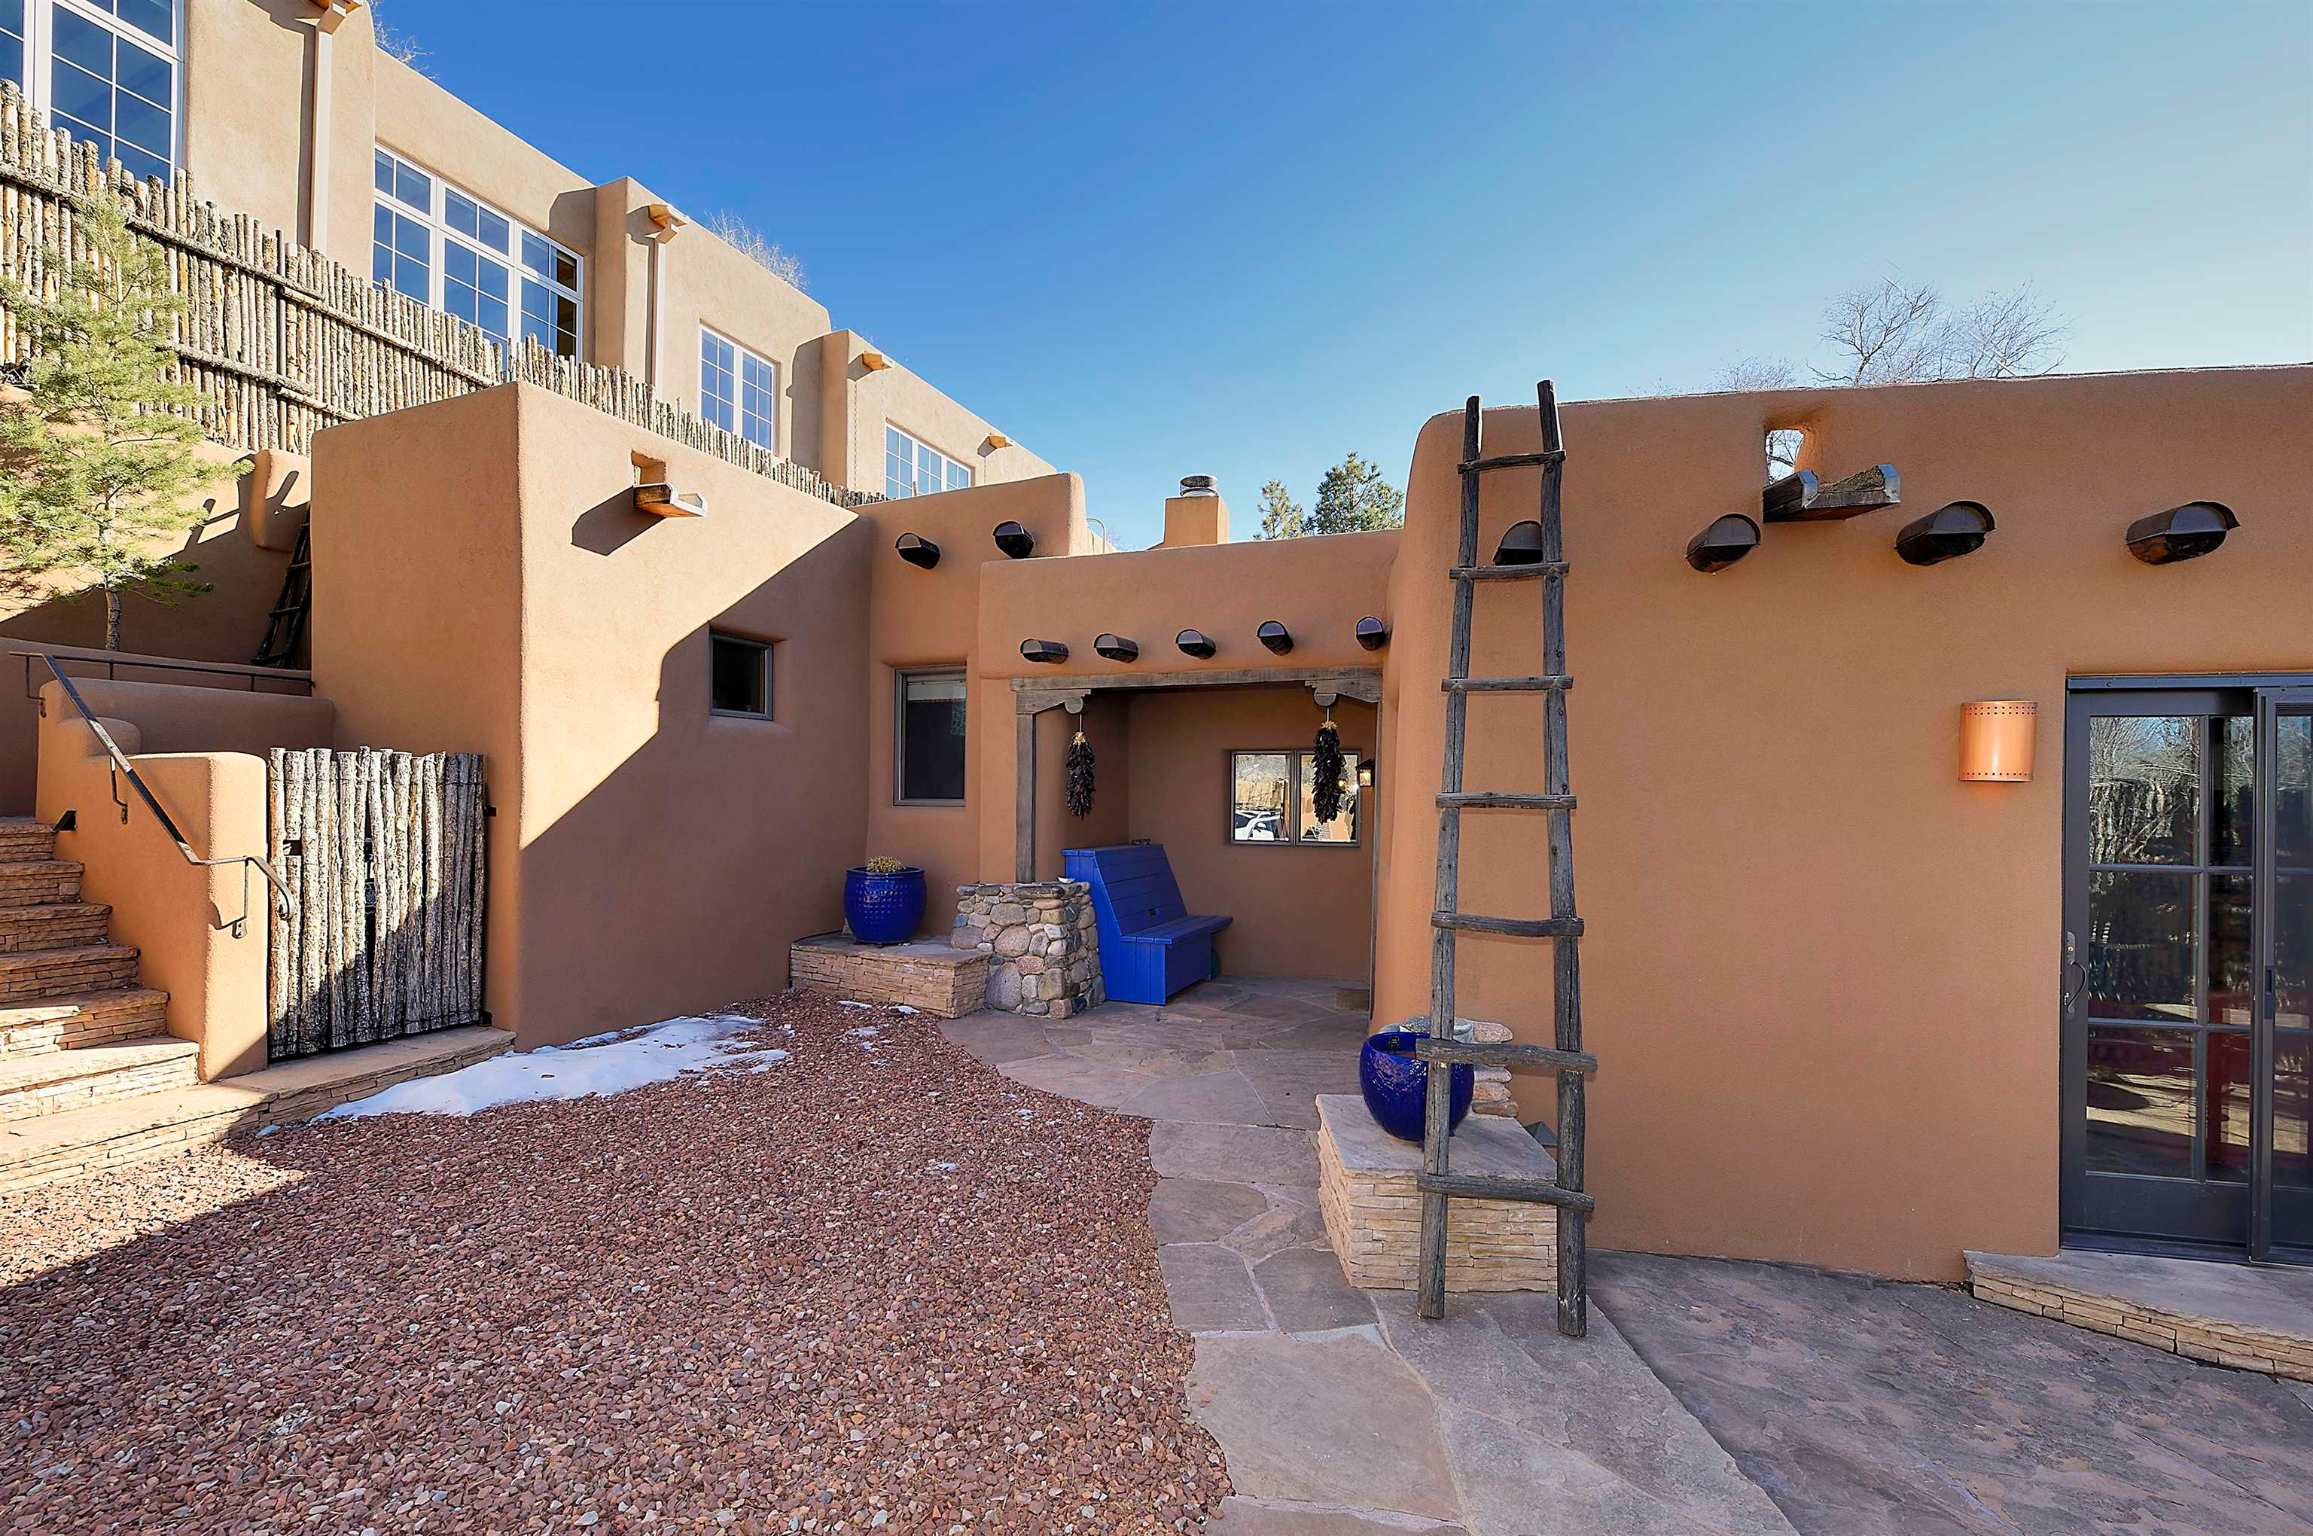 849 E Palace, Santa Fe, New Mexico 87501, 2 Bedrooms Bedrooms, ,2 BathroomsBathrooms,Residential,For Sale,849 E Palace,202200928